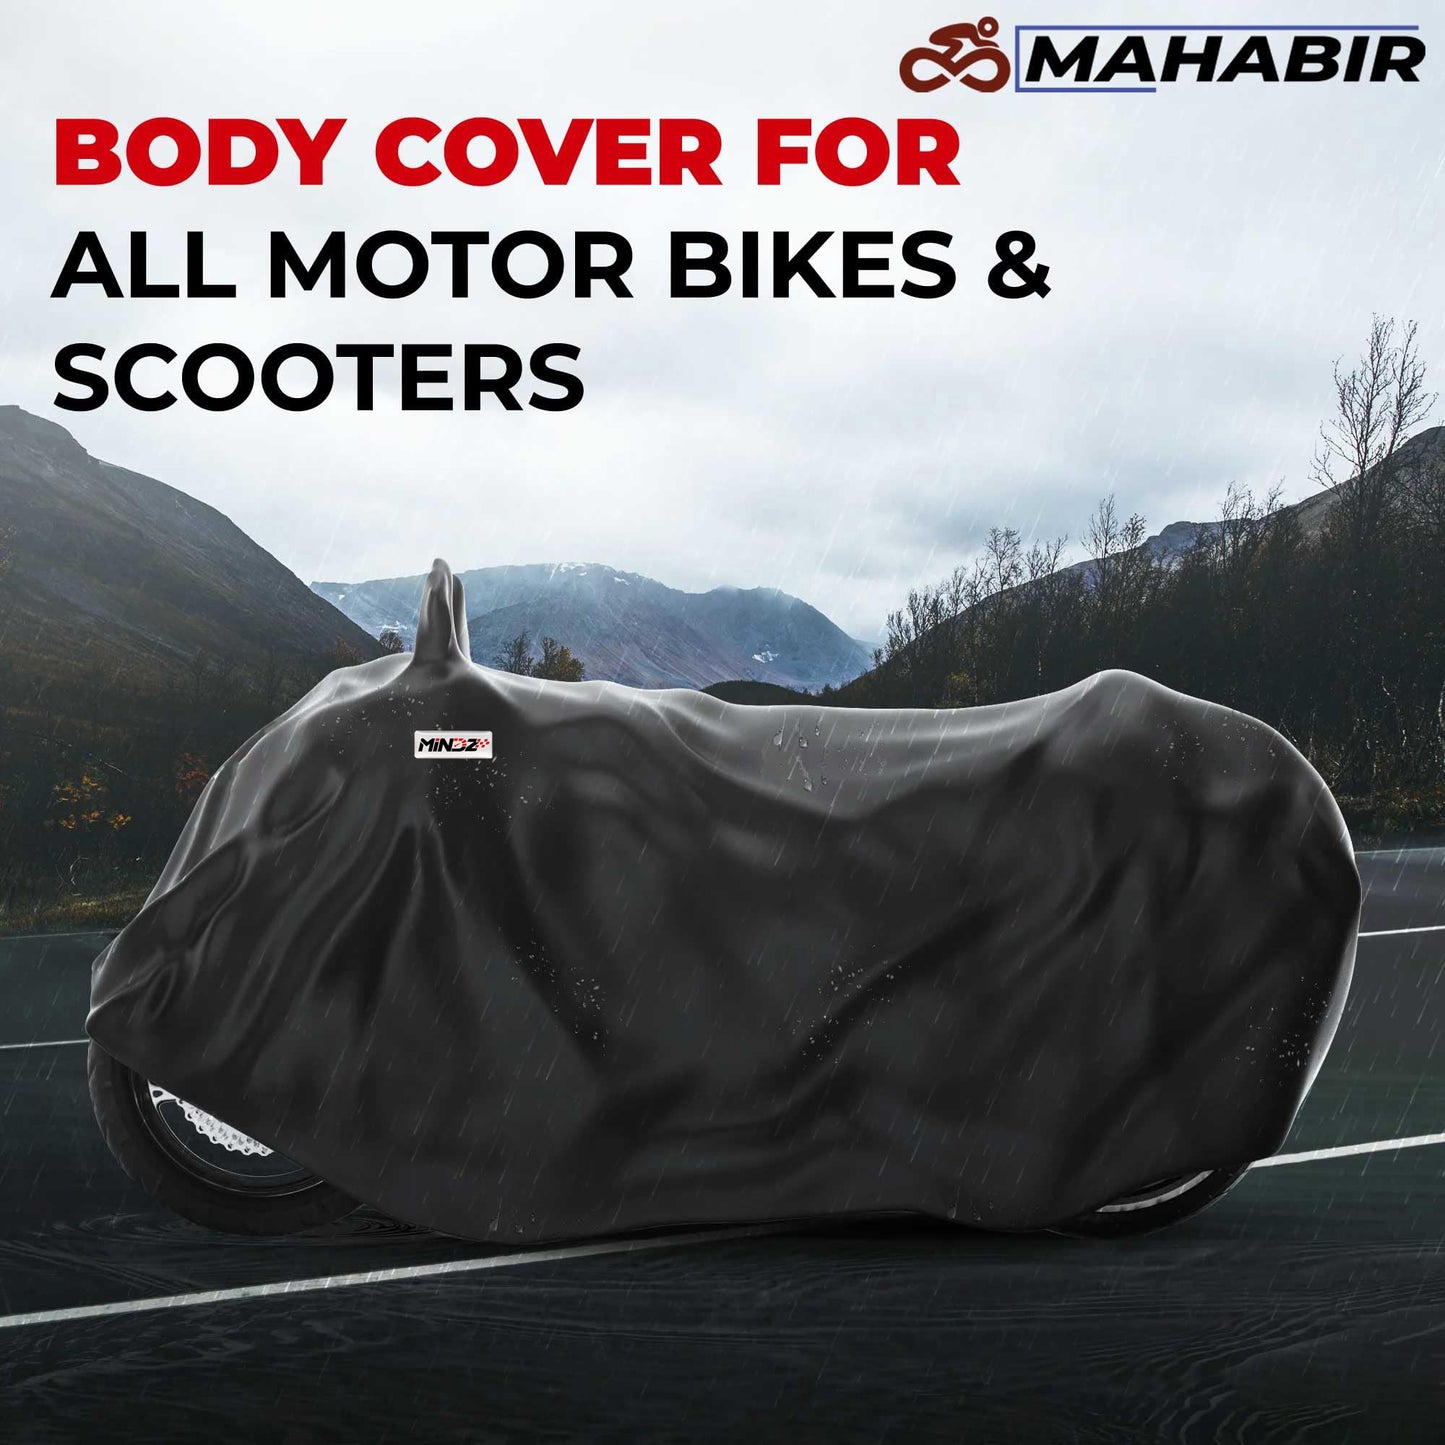 BODY COVER FOR FASCINO 125 BS6